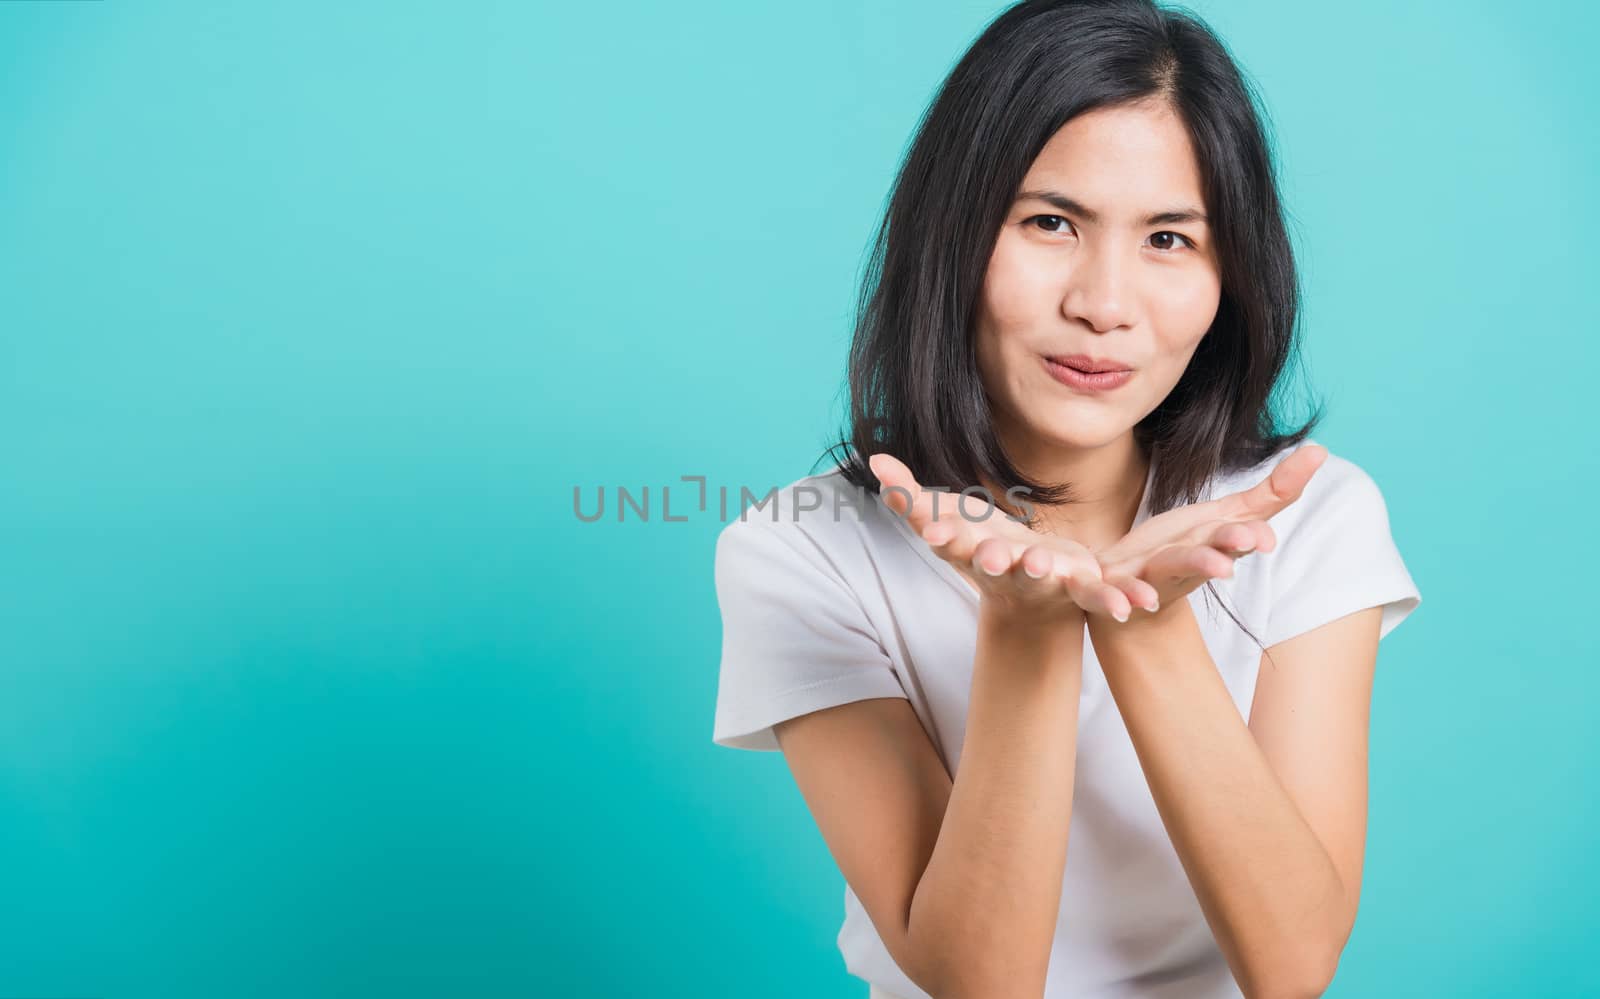 Portrait happy Asian beautiful young woman smile standing wear a white t-shirt, She blowing air kiss something on palms, studio shot on blue background with copy space for text